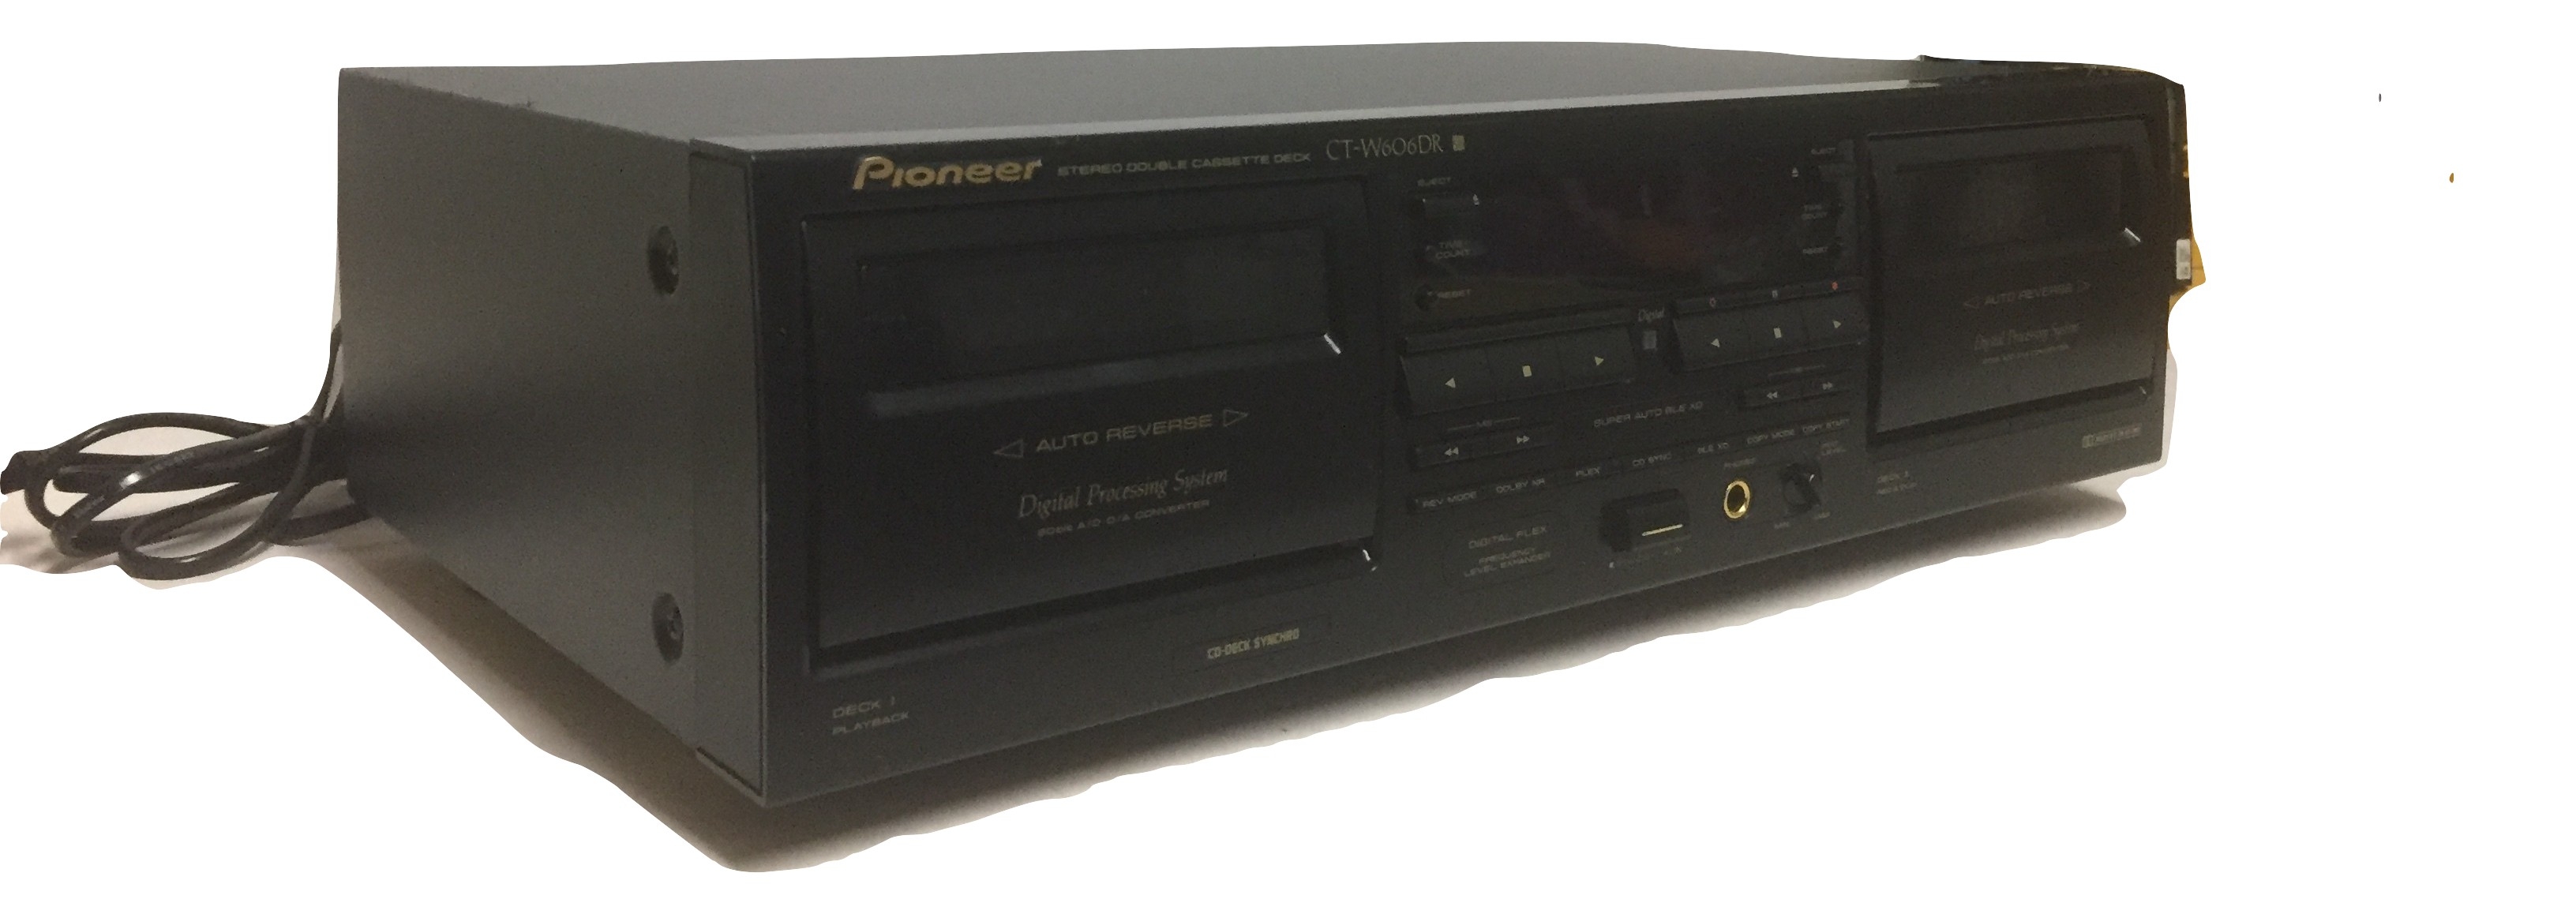 Pioneer-CT-W606DR - 132233